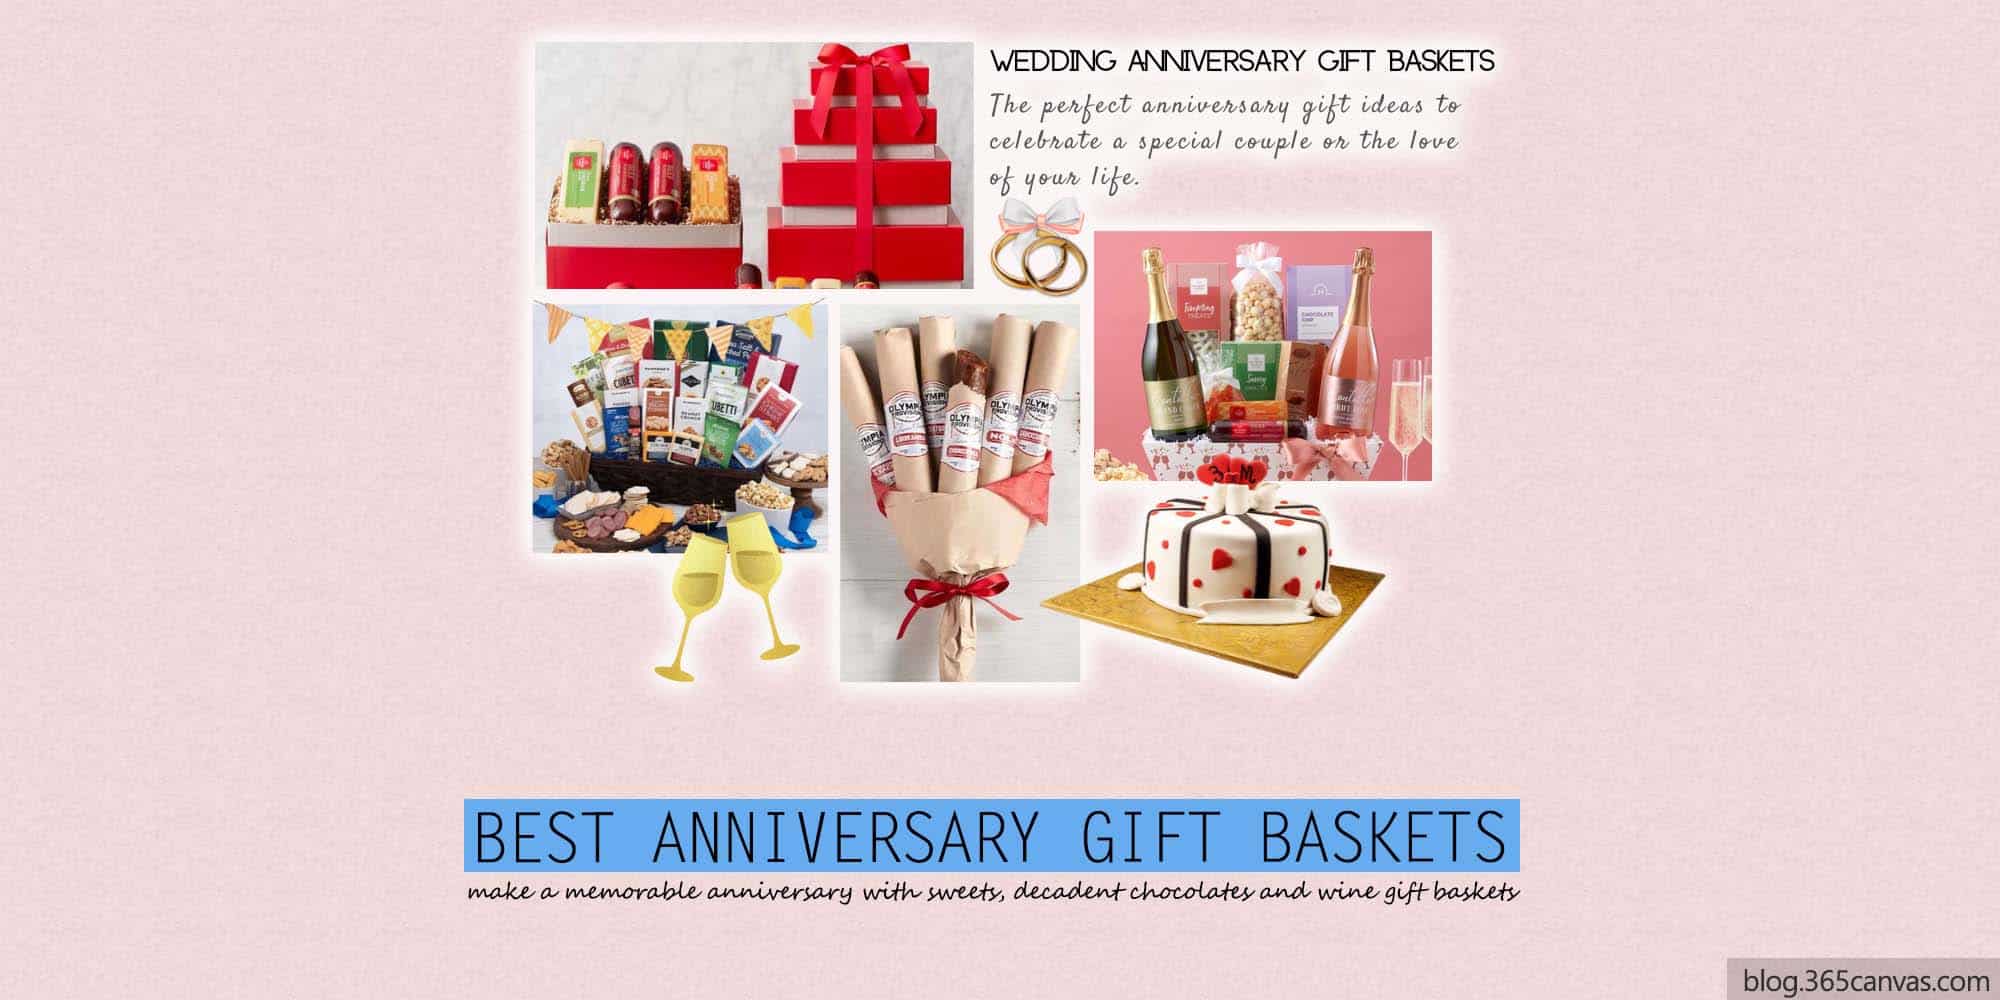 25 Best Anniversary Gift Baskets For Him, Her & Couple (2022)